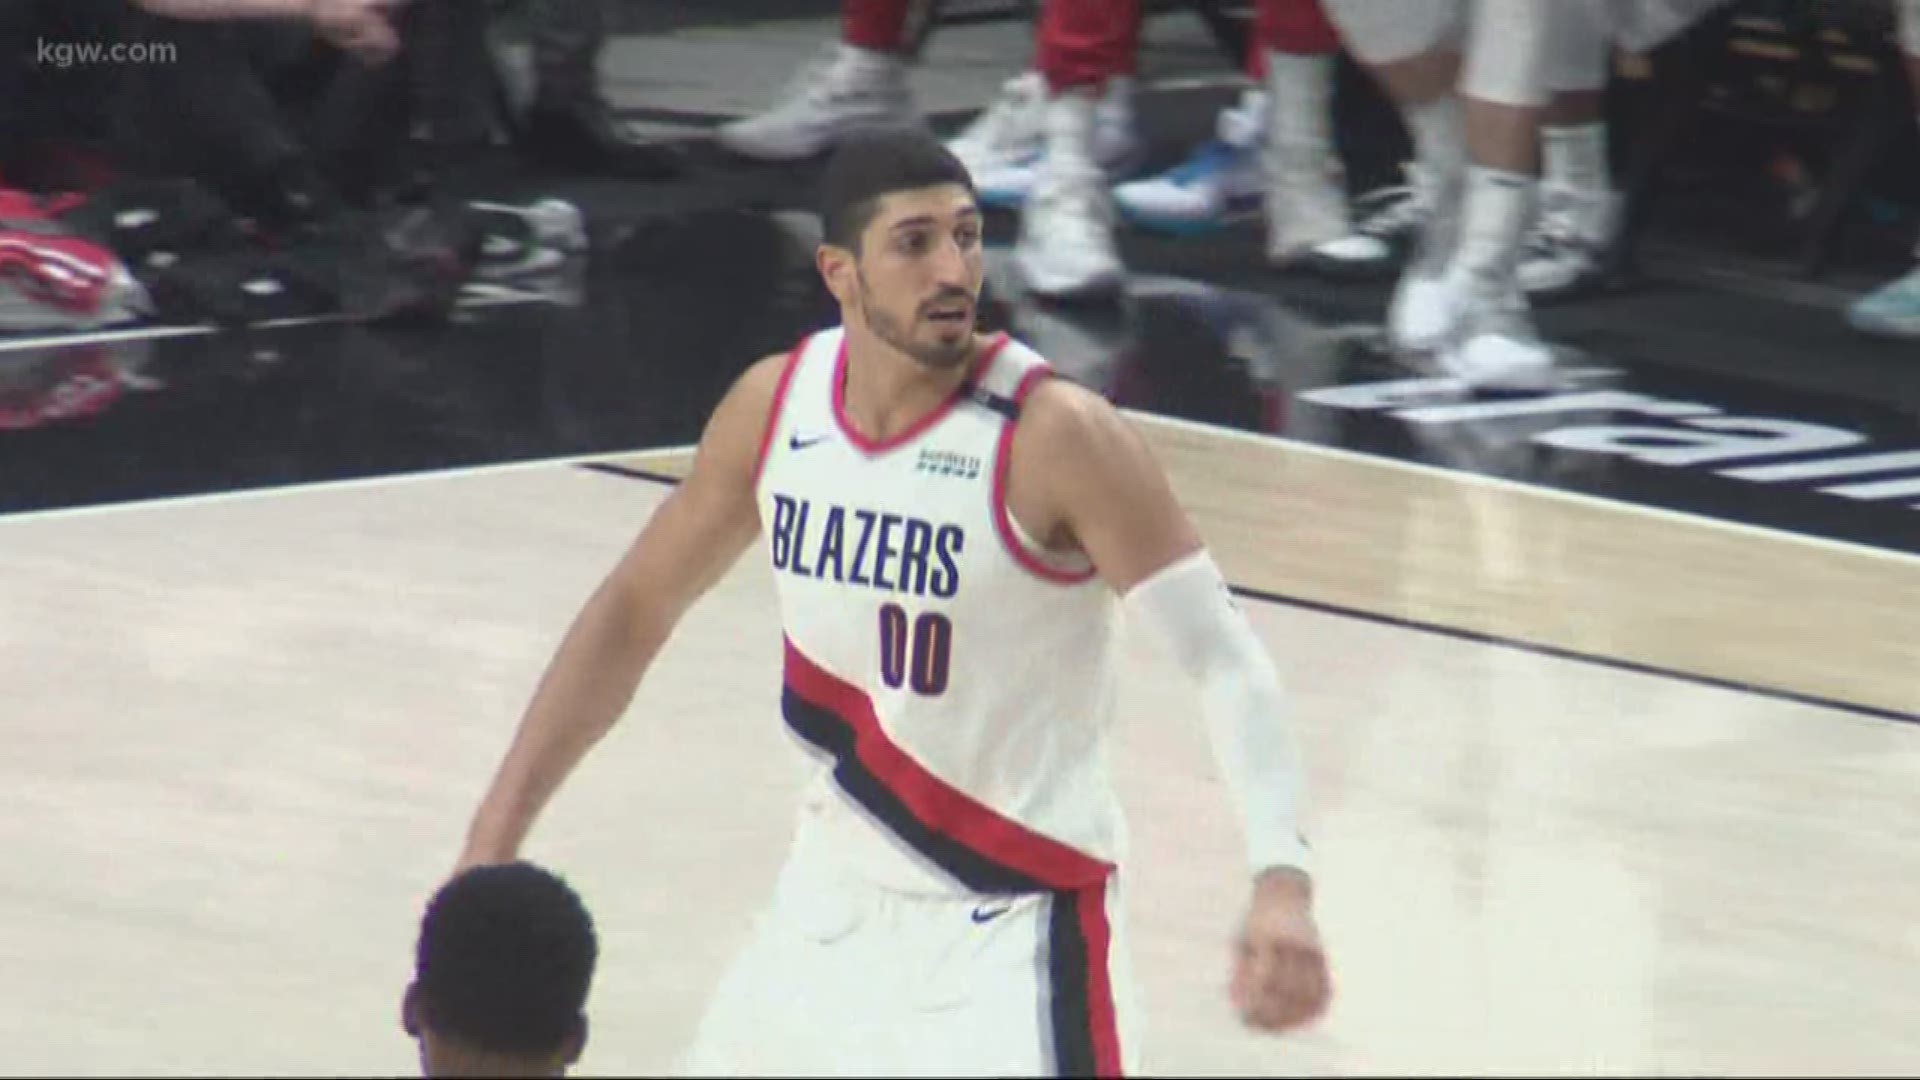 Blazers center Enes Kanter is a devout Muslim, and Monday marks the first day of the Muslim holy month of Ramadan. For 30 days, Kanter will fast from sunrise to sunset.